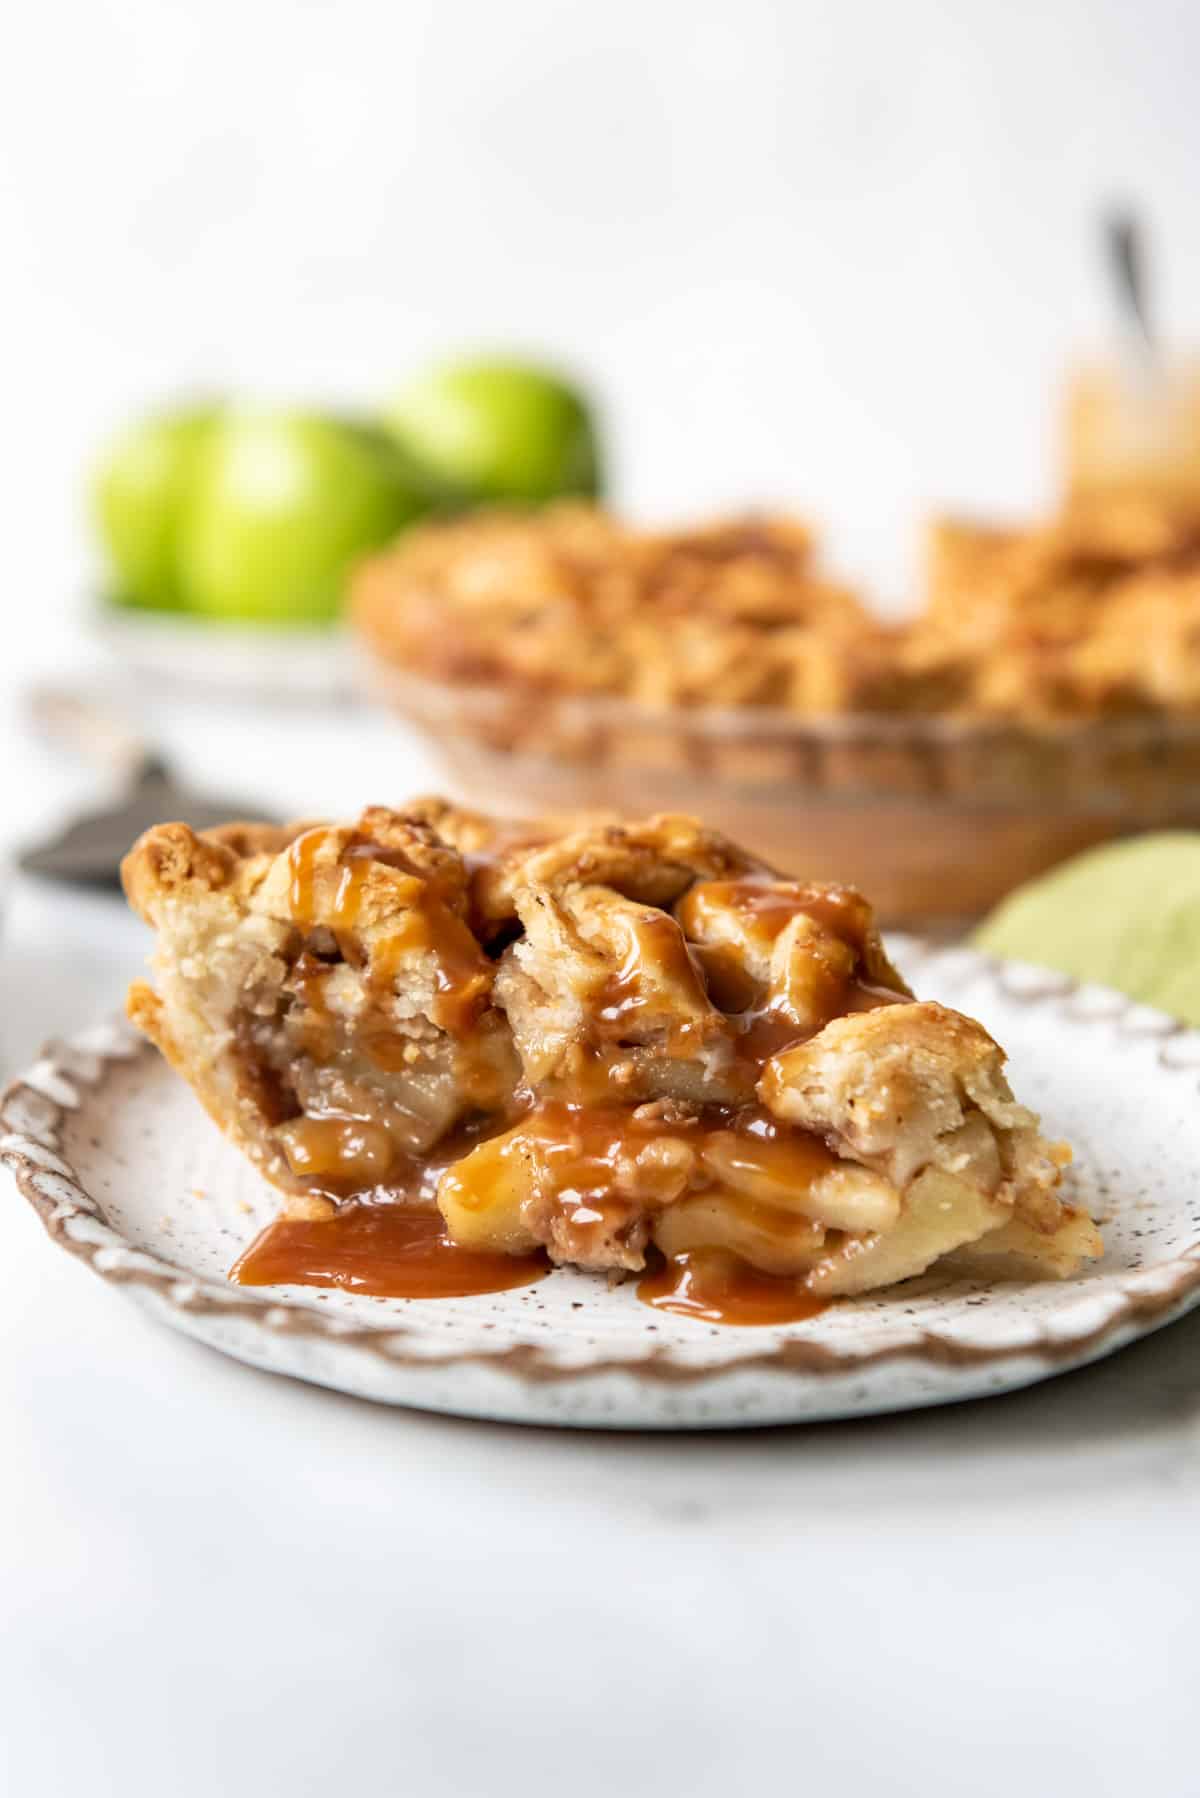 A slice of apple pie made with granny smith apples.